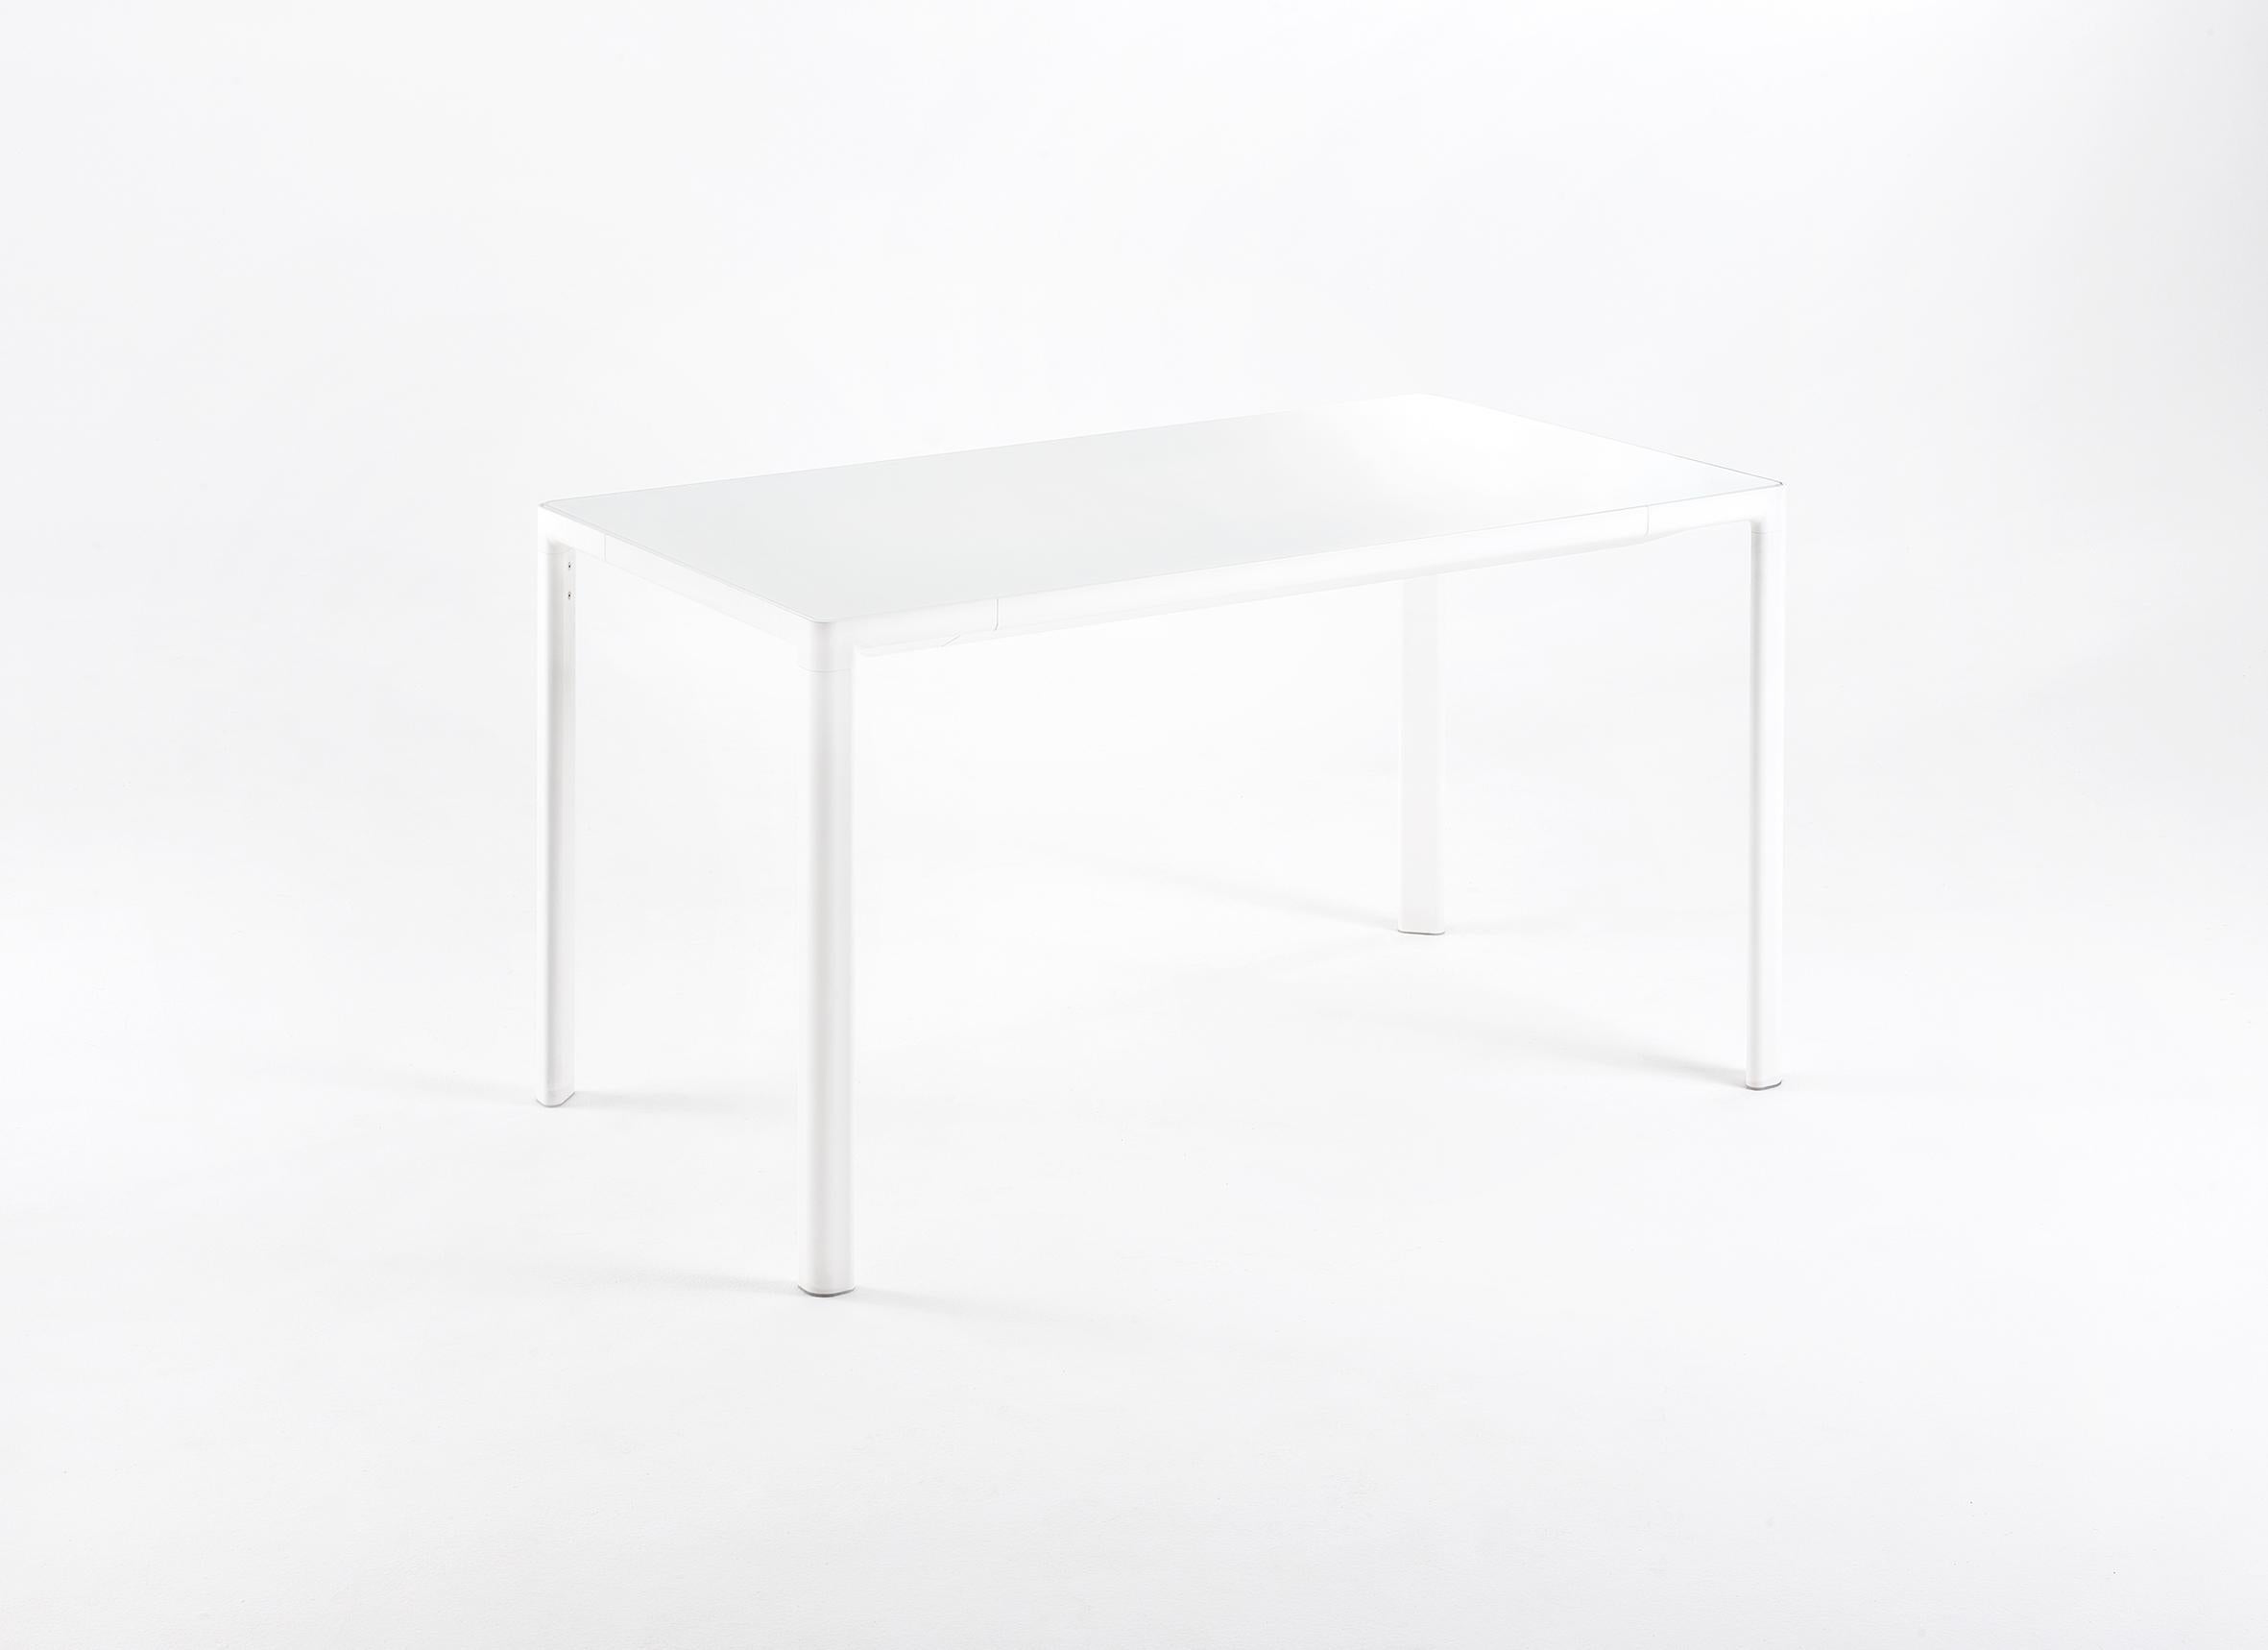 Kartell’s collection of tables now offers yet another function thanks to the extension table designed by Piero Lissoni. Zoom has a solid and rigorous frame but the legs of bent laminate taper its shape. The tempered glass top back-painted white is